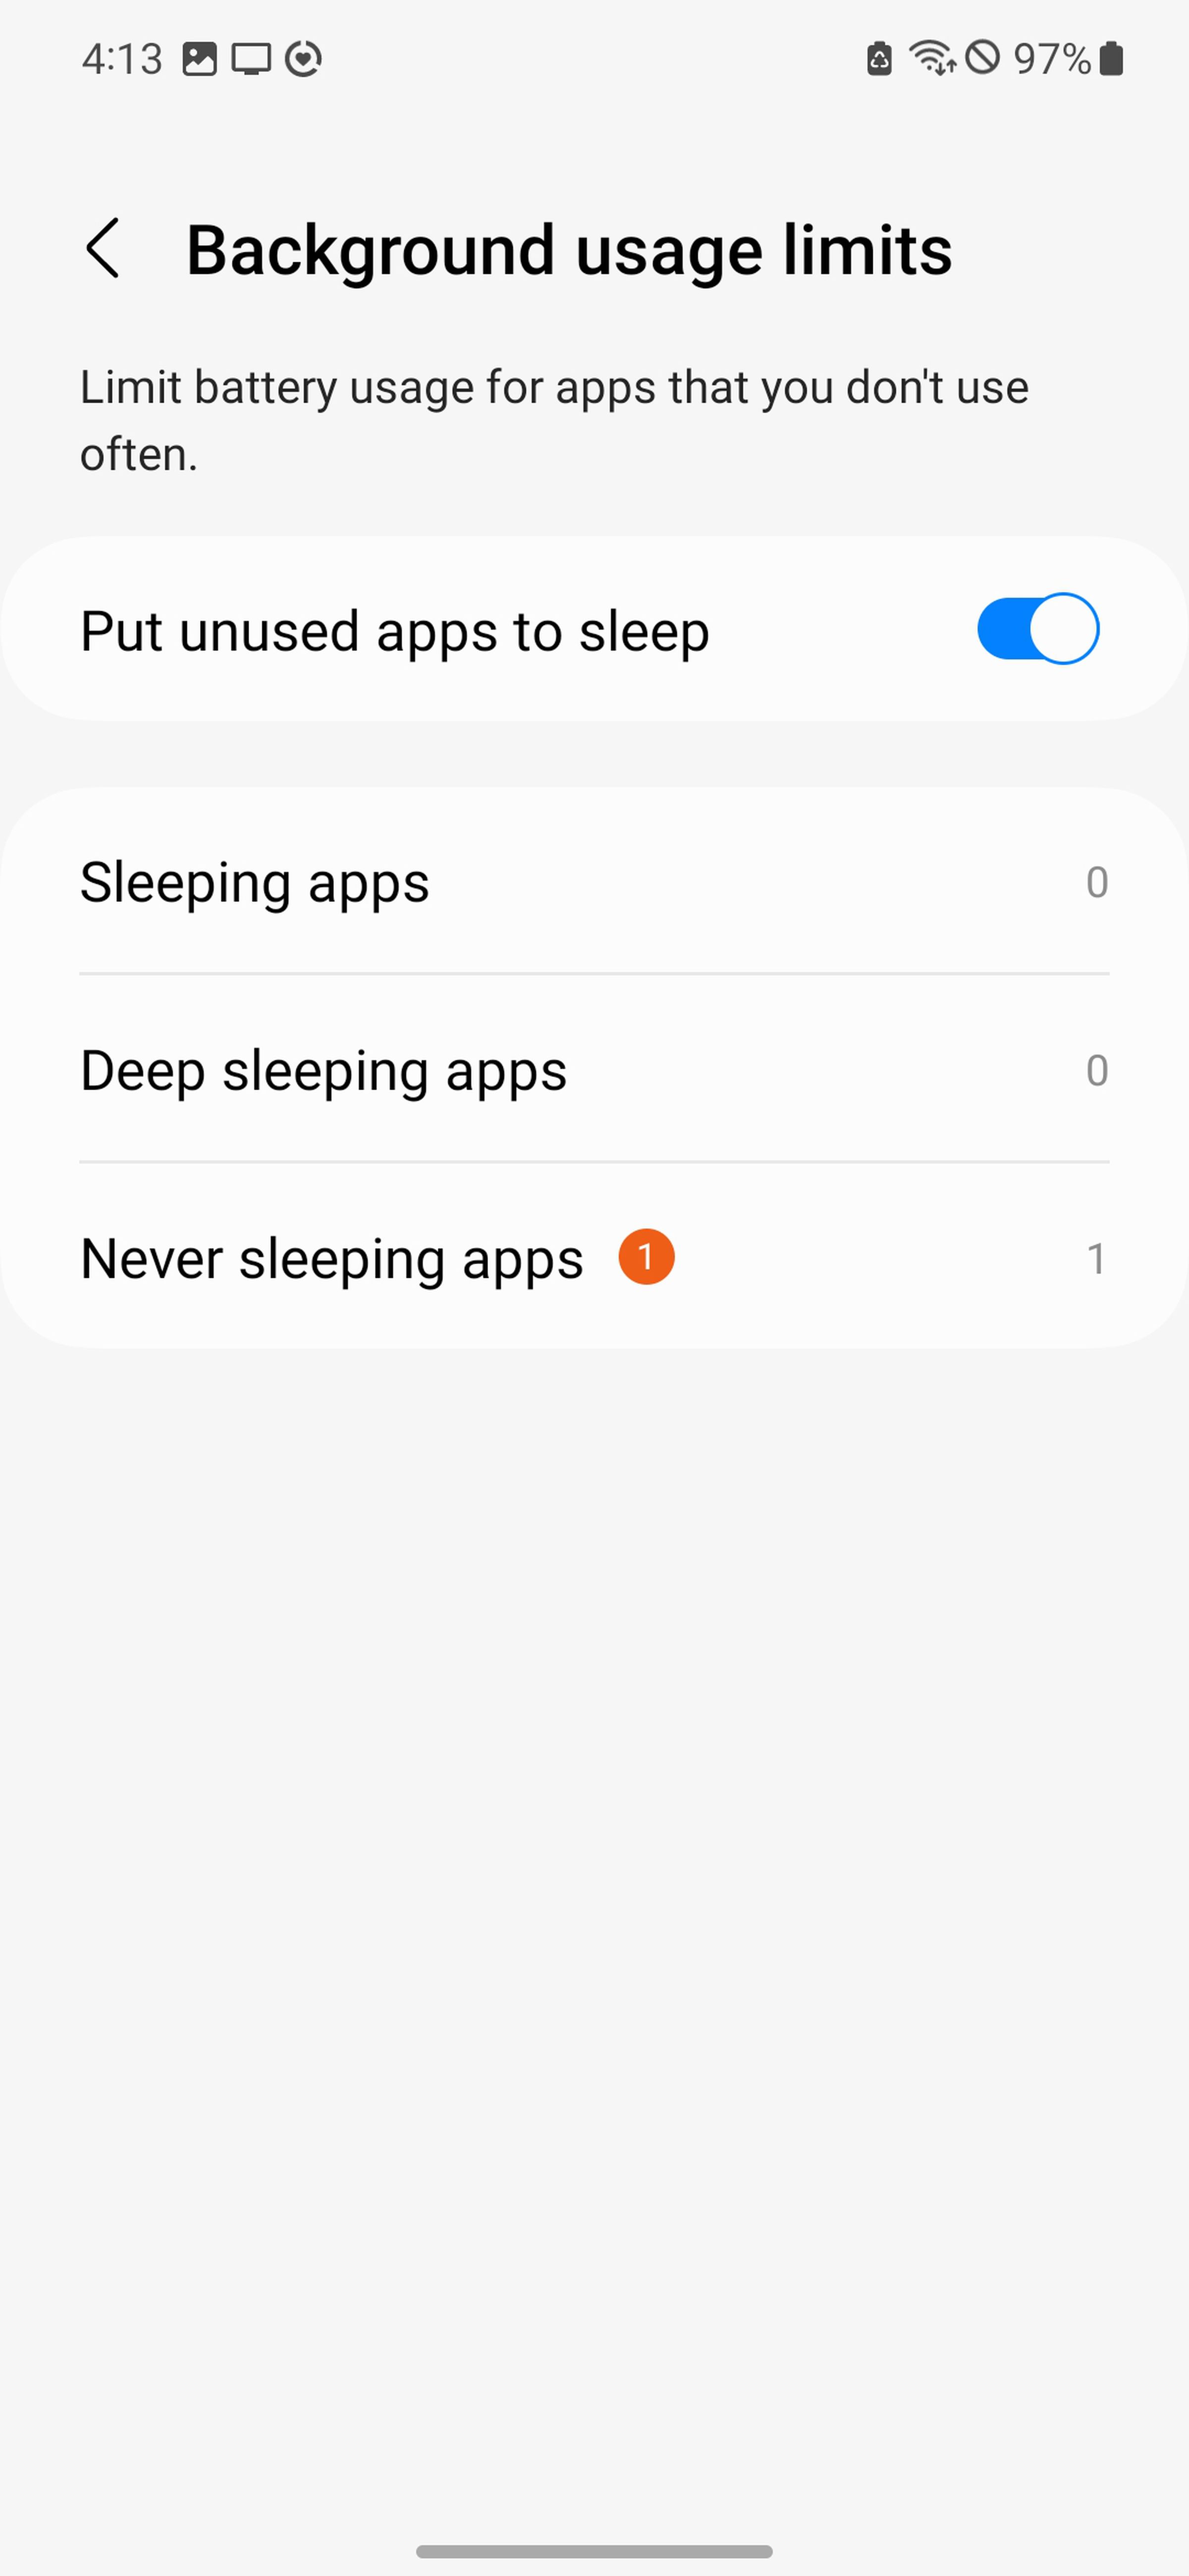 Page headed “Background usage limits” with a toggle labeled “Put unused apps to sleep” and underneath listed Sleeping apps, Deep sleeping apps, and Never sleeping apps.